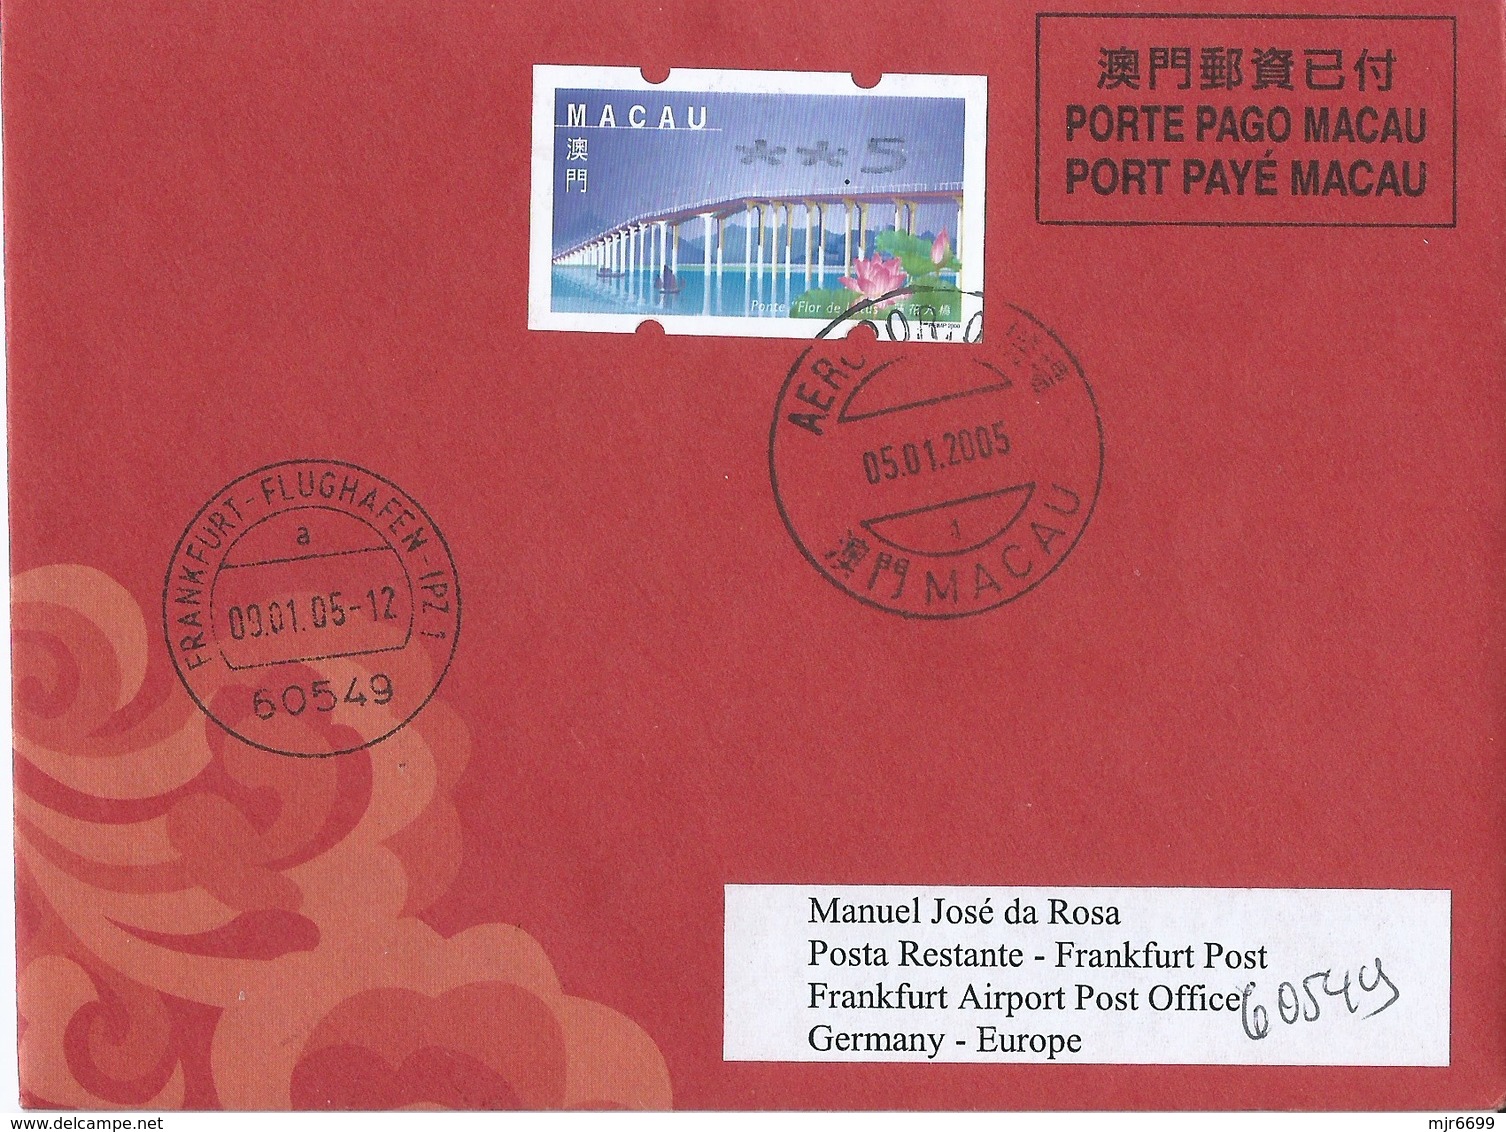 MACAU 2005 LUNAR NEW YEAR OF THE COCK GREETING CARD & POSTAGE PAID COVER 1ST DAY USAGE TO GERMANY - Postal Stationery